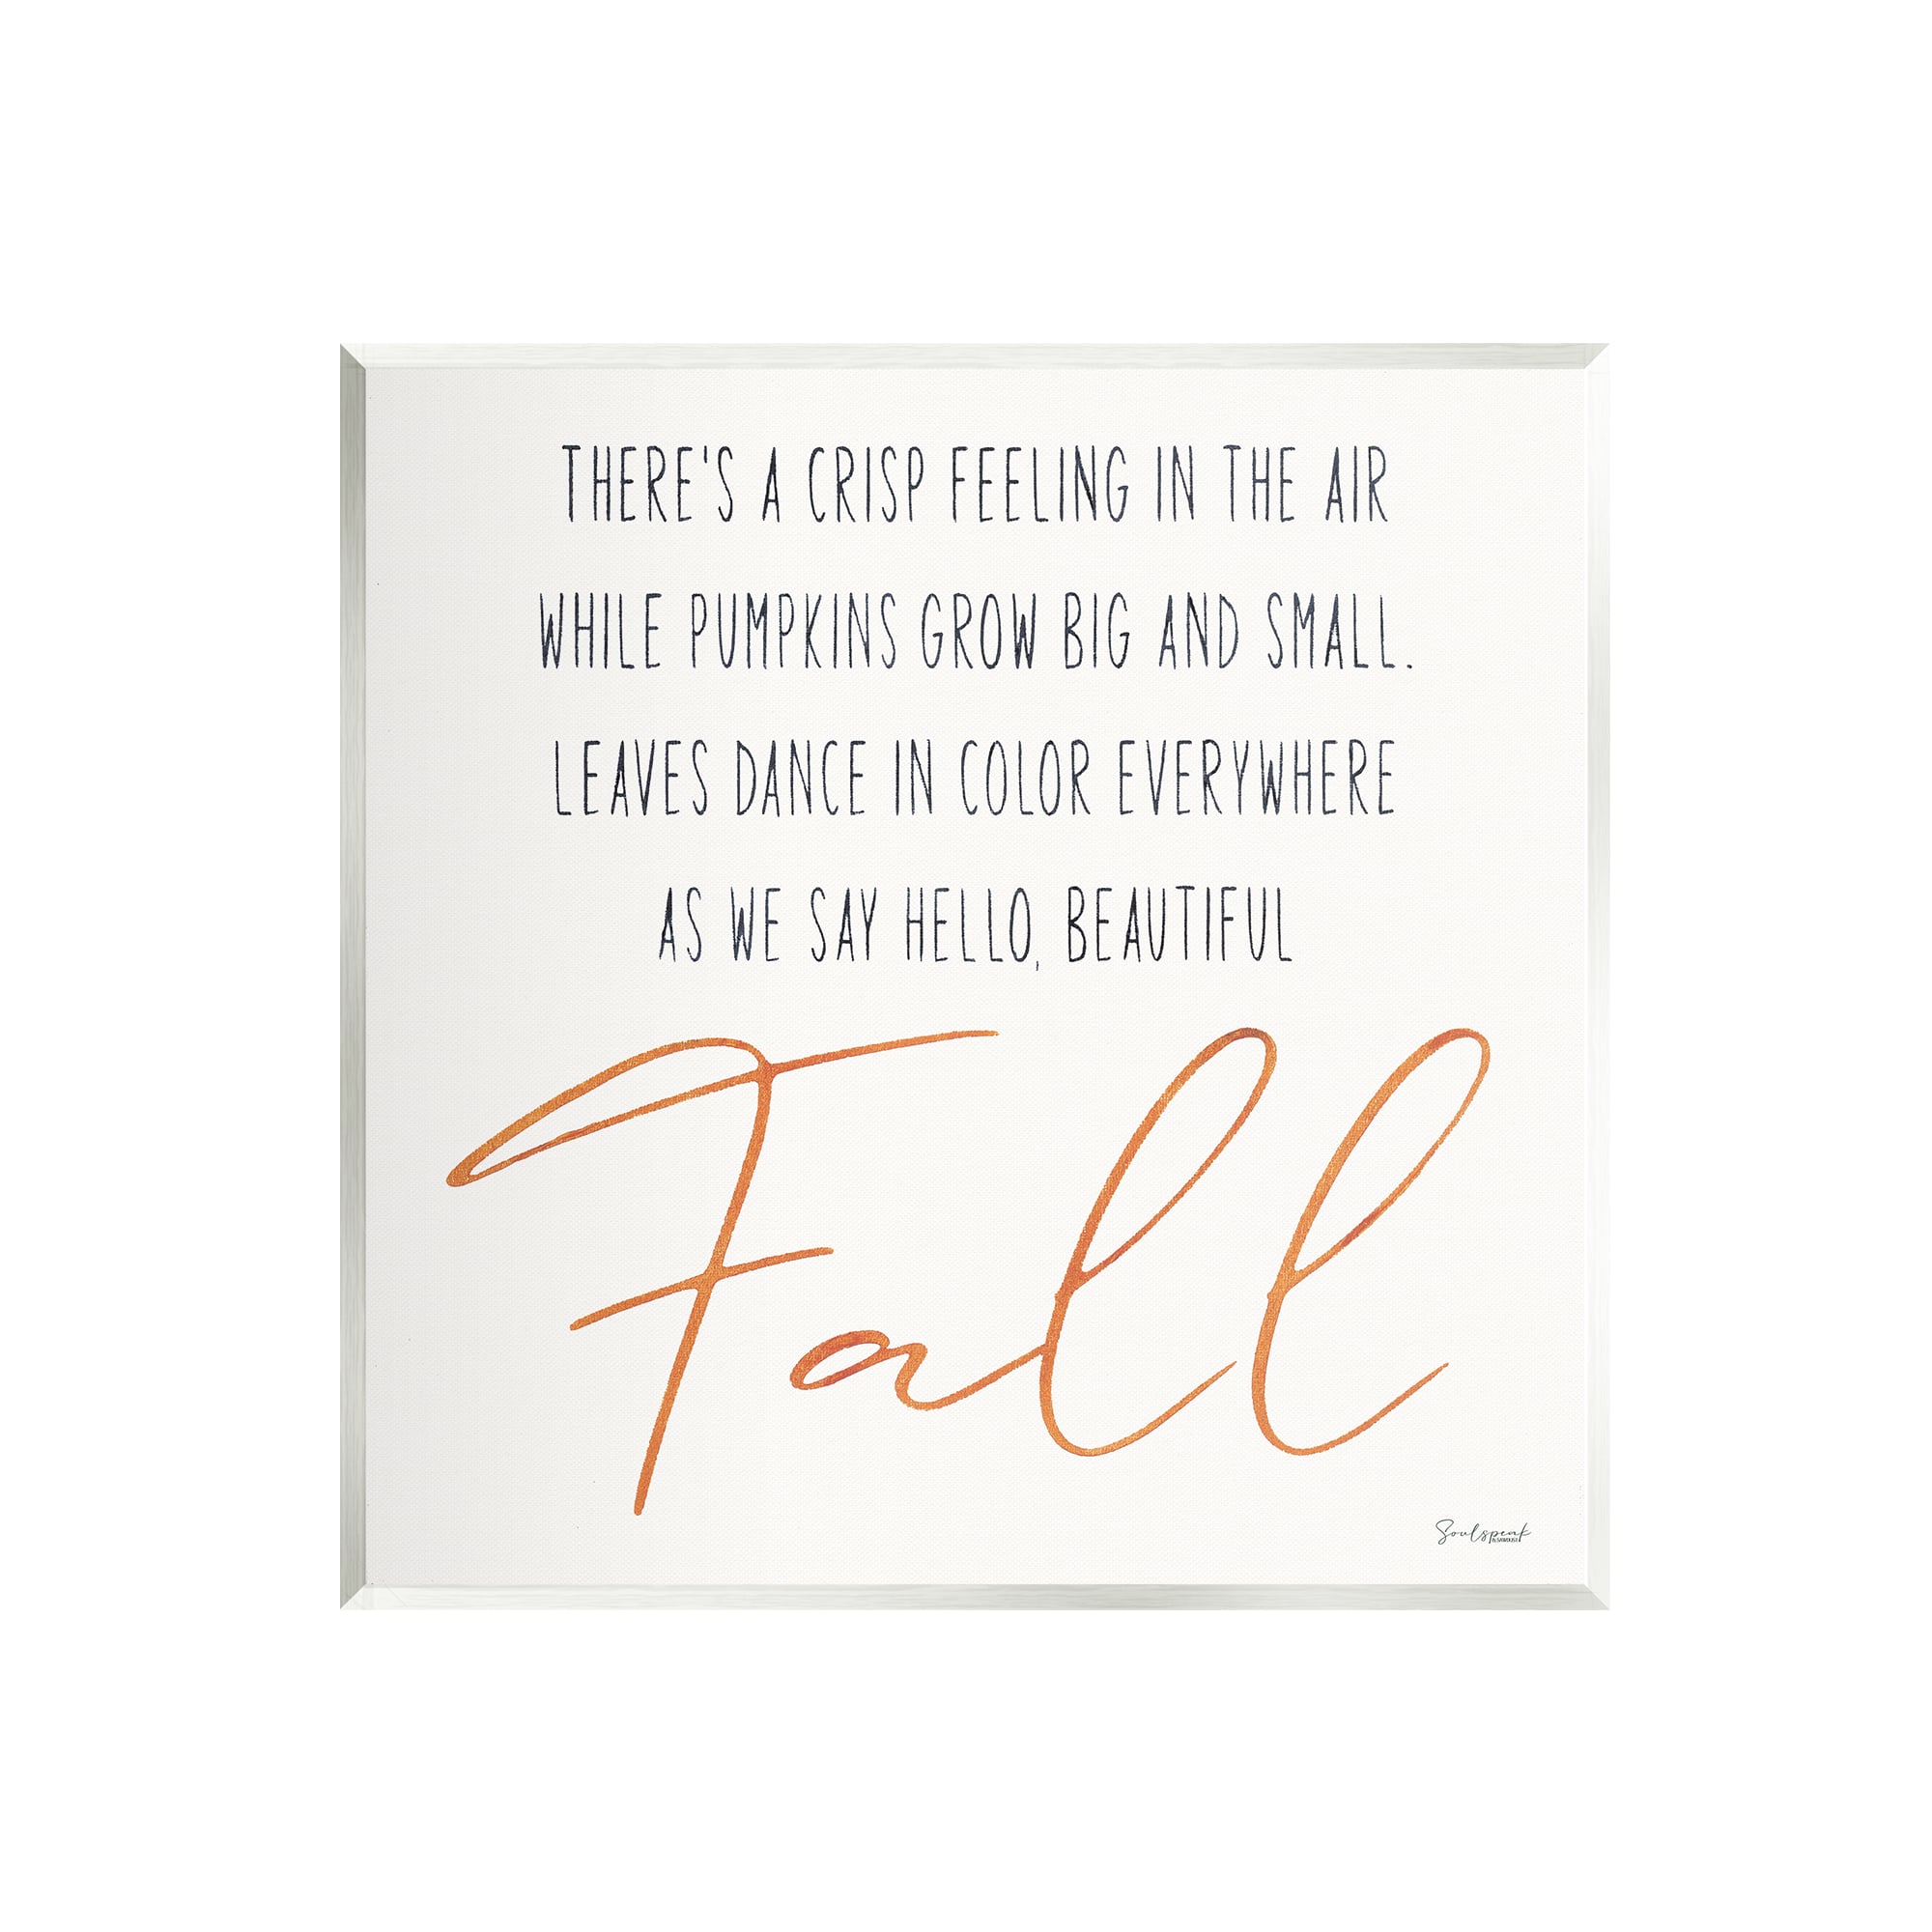 Stupell Industries Hello Beautiful Fall Uplifting Rhyme Wall Plaque Art